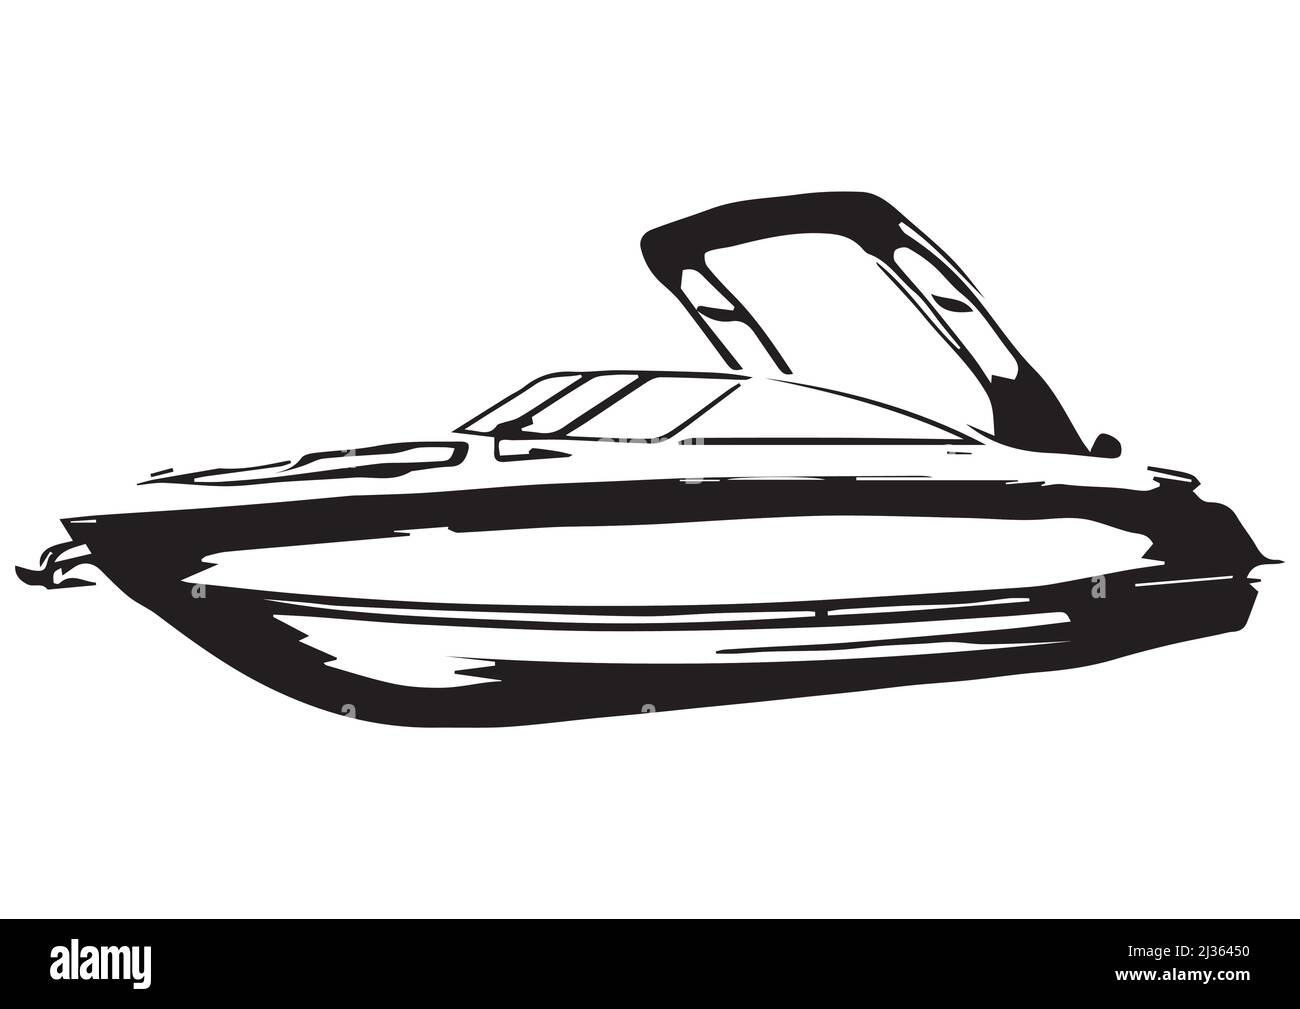 https://c8.alamy.com/comp/2J36450/illustration-of-black-and-white-shadow-of-a-speed-boat-with-hairclip-on-white-black-background-best-in-vector-water-vehicle-2J36450.jpg